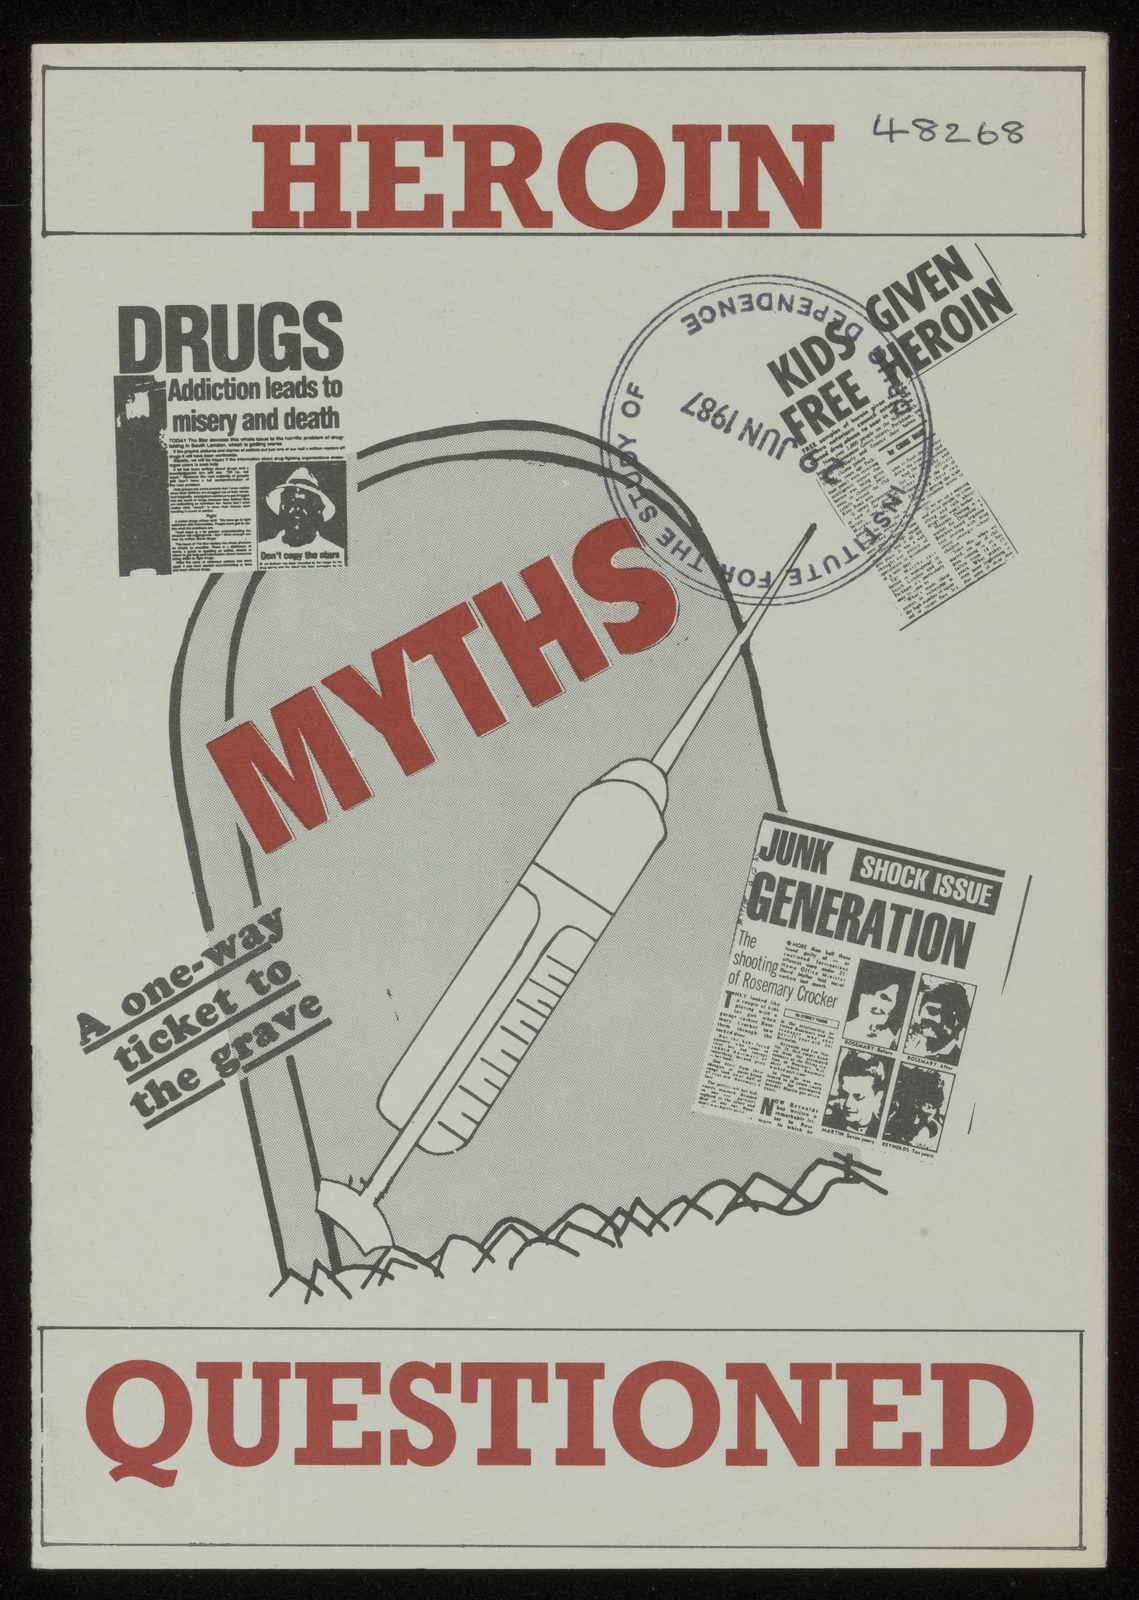 Front cover of a pamphlet featuring bold red text, an illustration of a syringe, and four newspaper clippings with titles including 'Junk Generation' and 'Kids Given Free Heroin'.